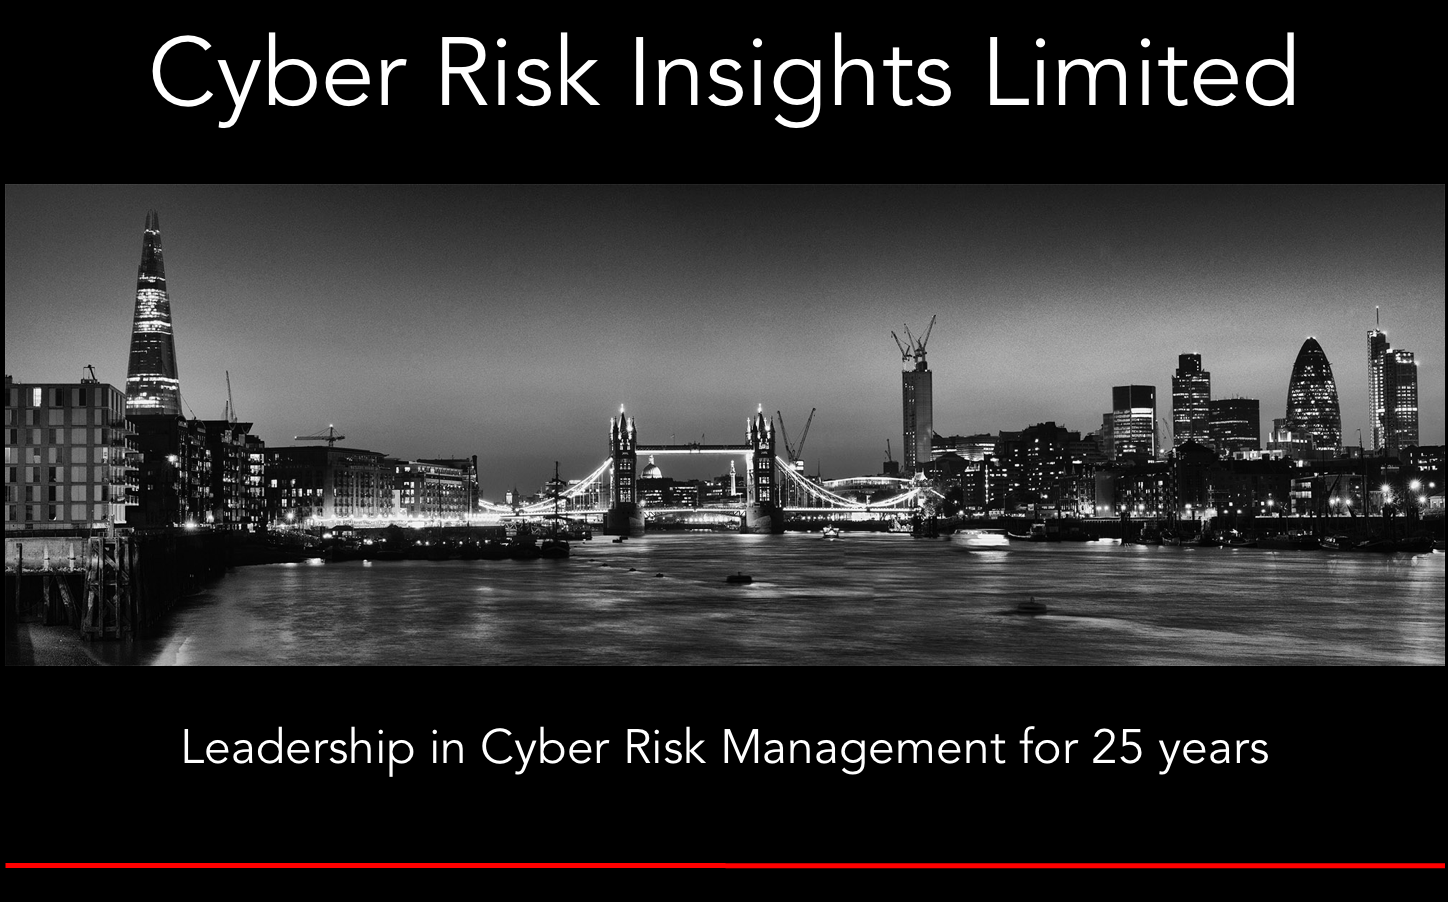 Cyber Risk Insights Limited